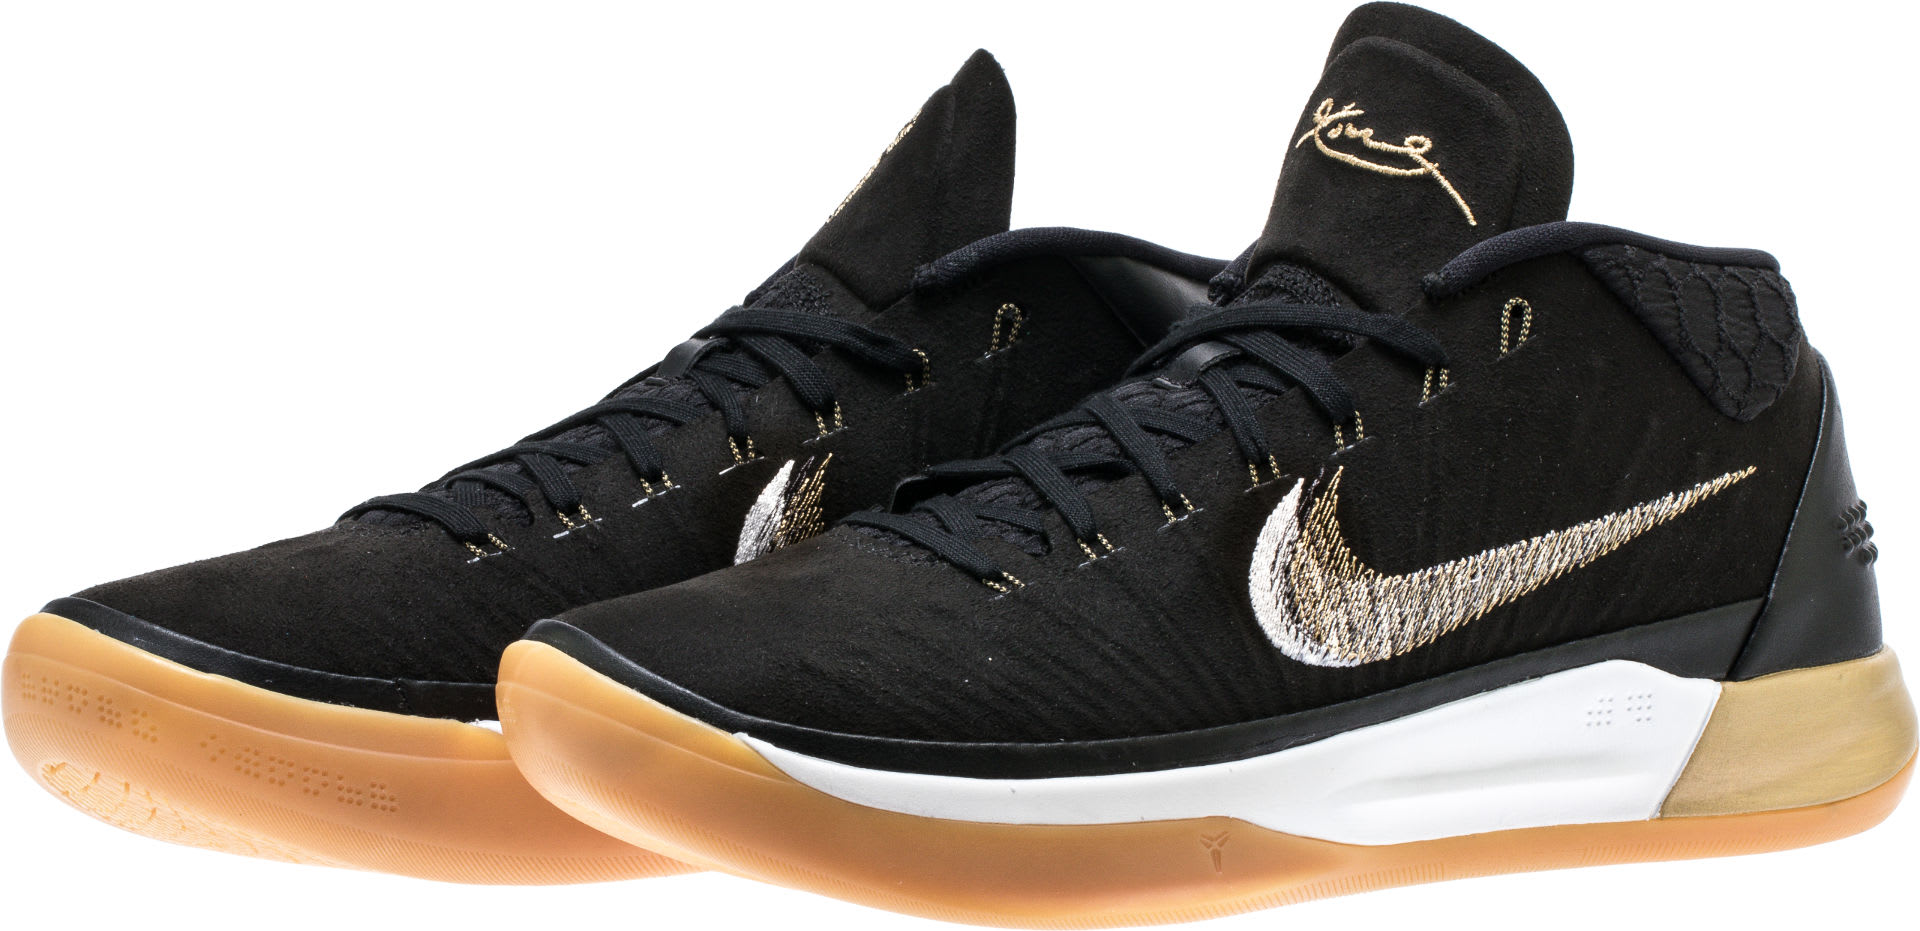 Nike Kobe A.D. Mid Black/Gold Release Date 922482-009 Pair